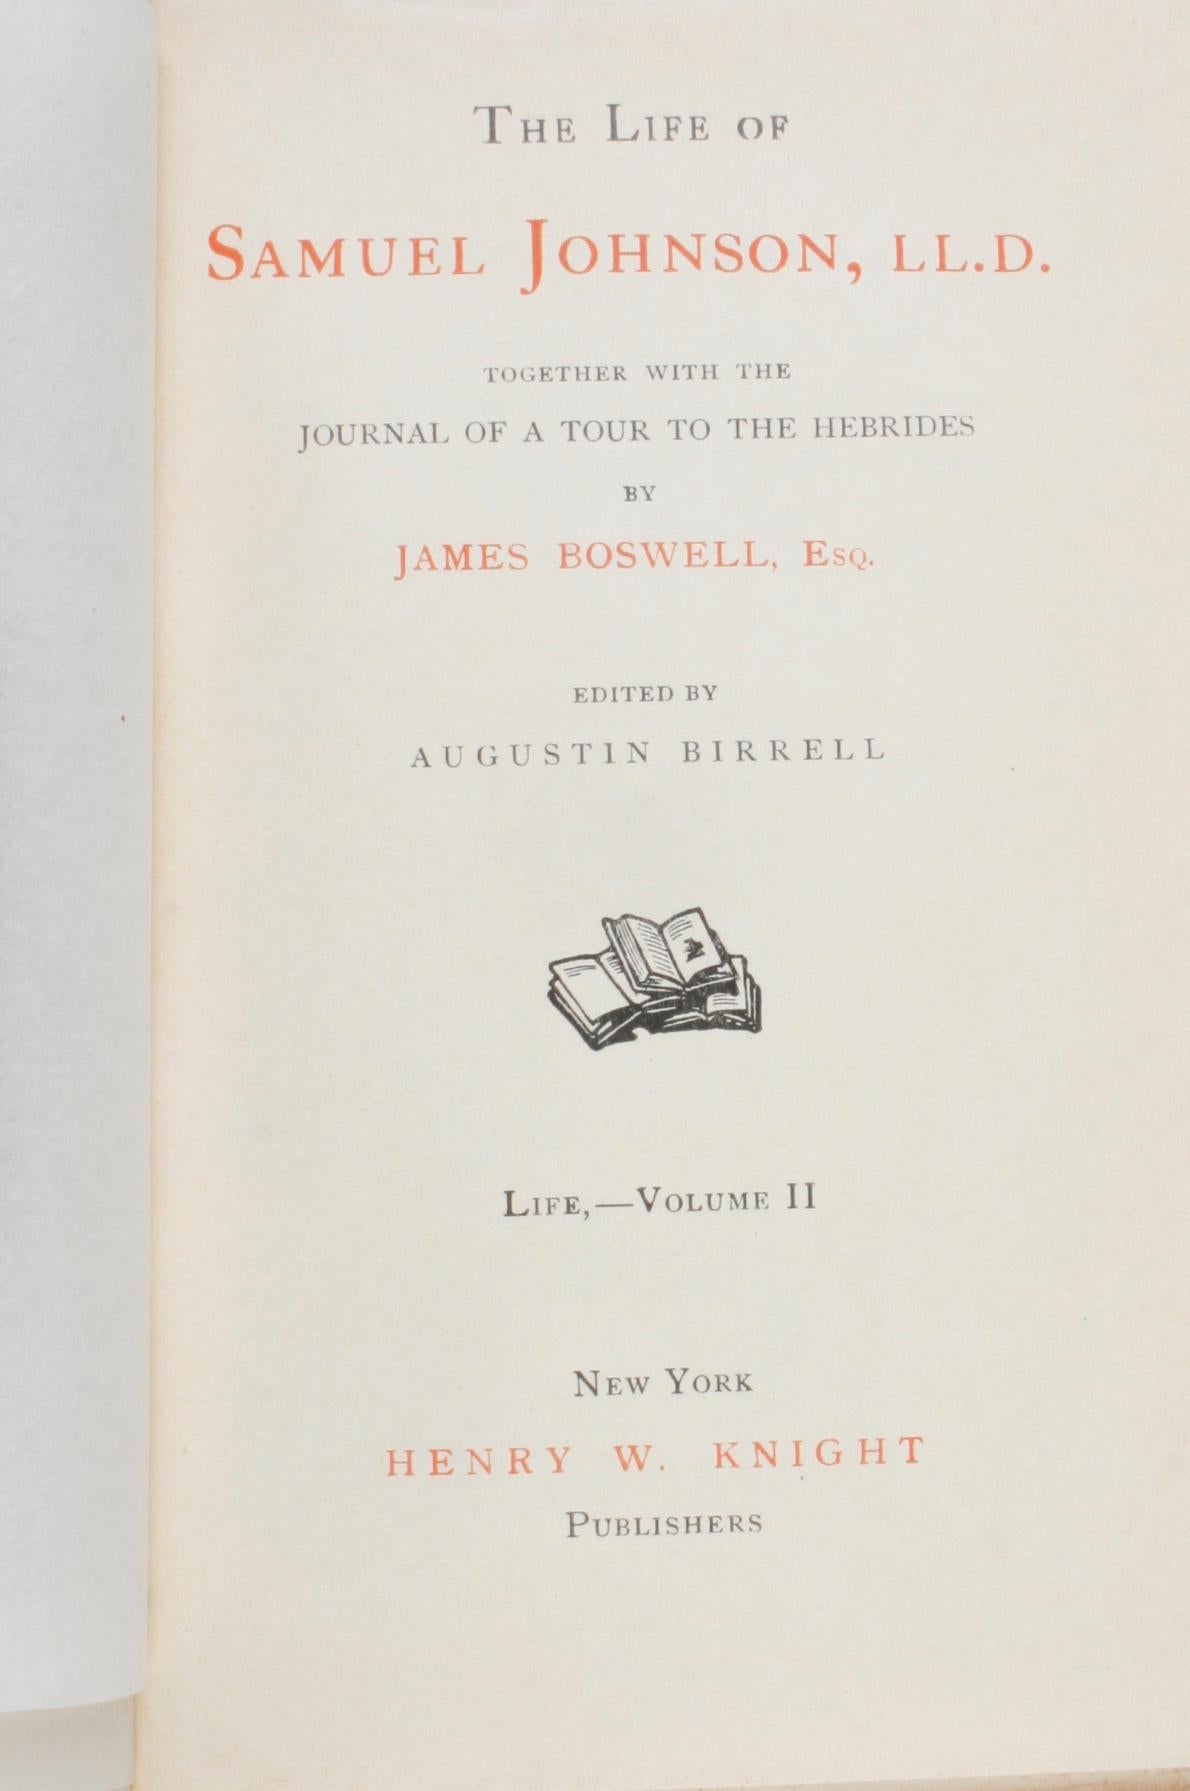 American The Life of Johnson by James Boswell, Esq., Two Limited Editions